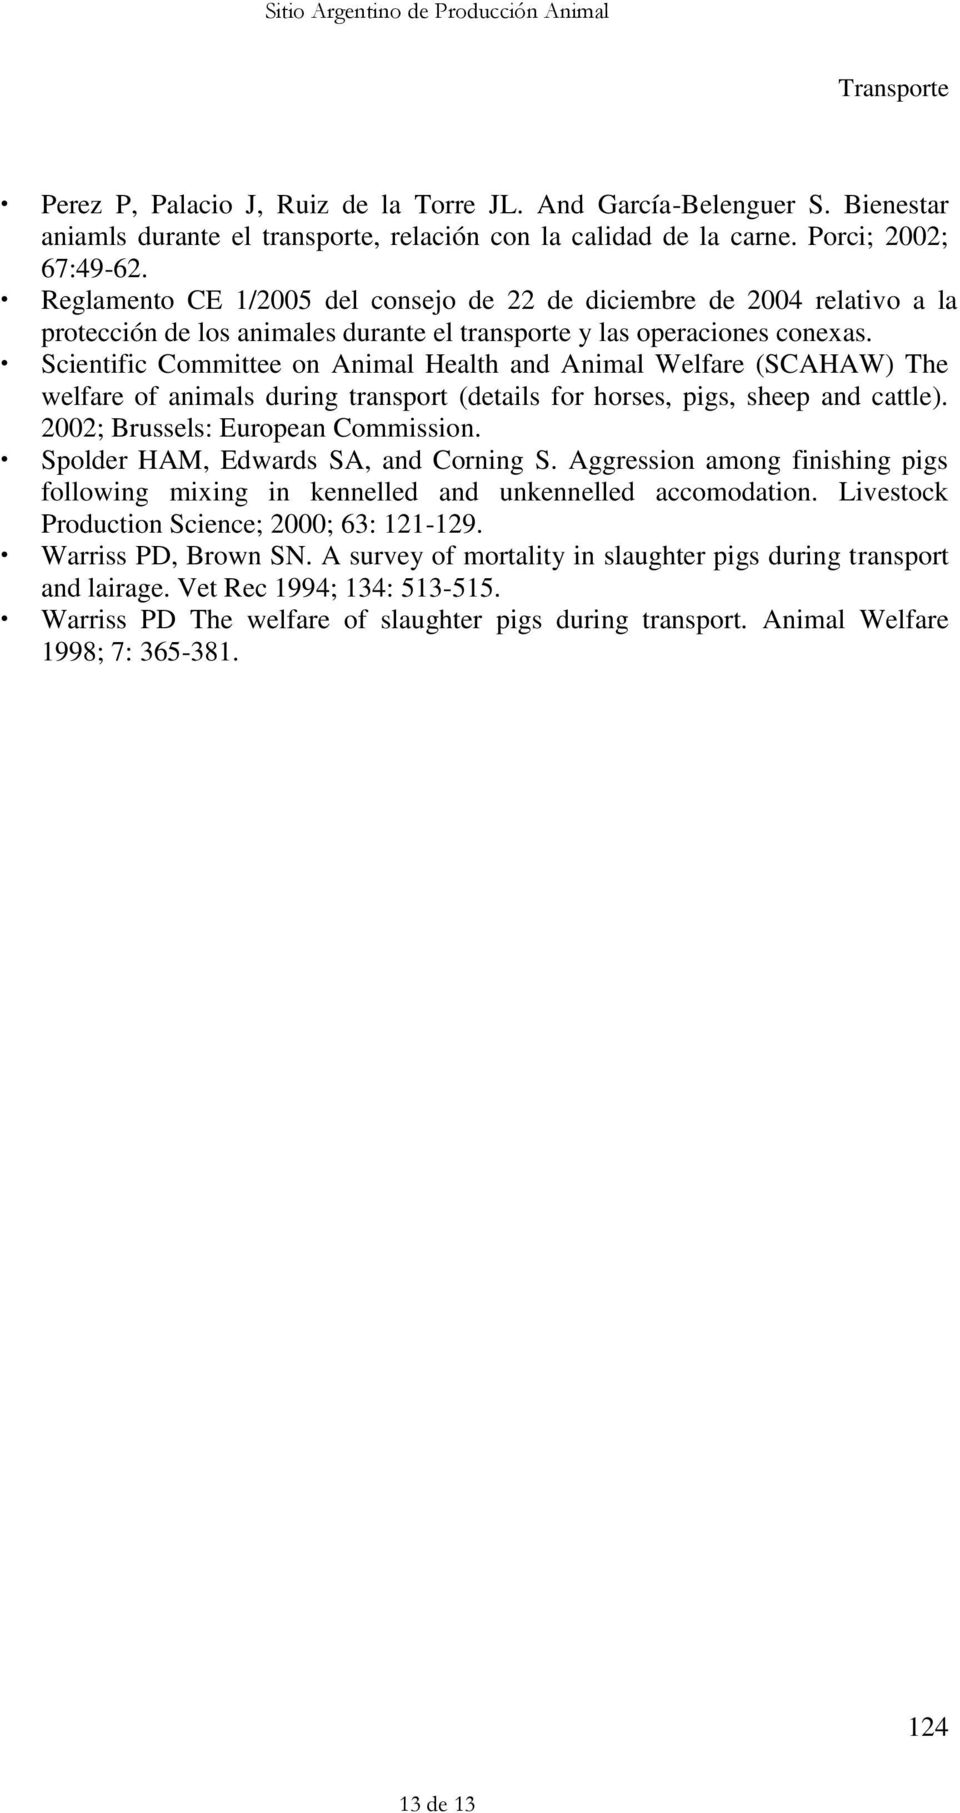 Scientific Committee on Animal Health and Animal Welfare (SCAHAW) The welfare of animals during transport (details for horses, pigs, sheep and cattle). 2002; Brussels: European Commission.